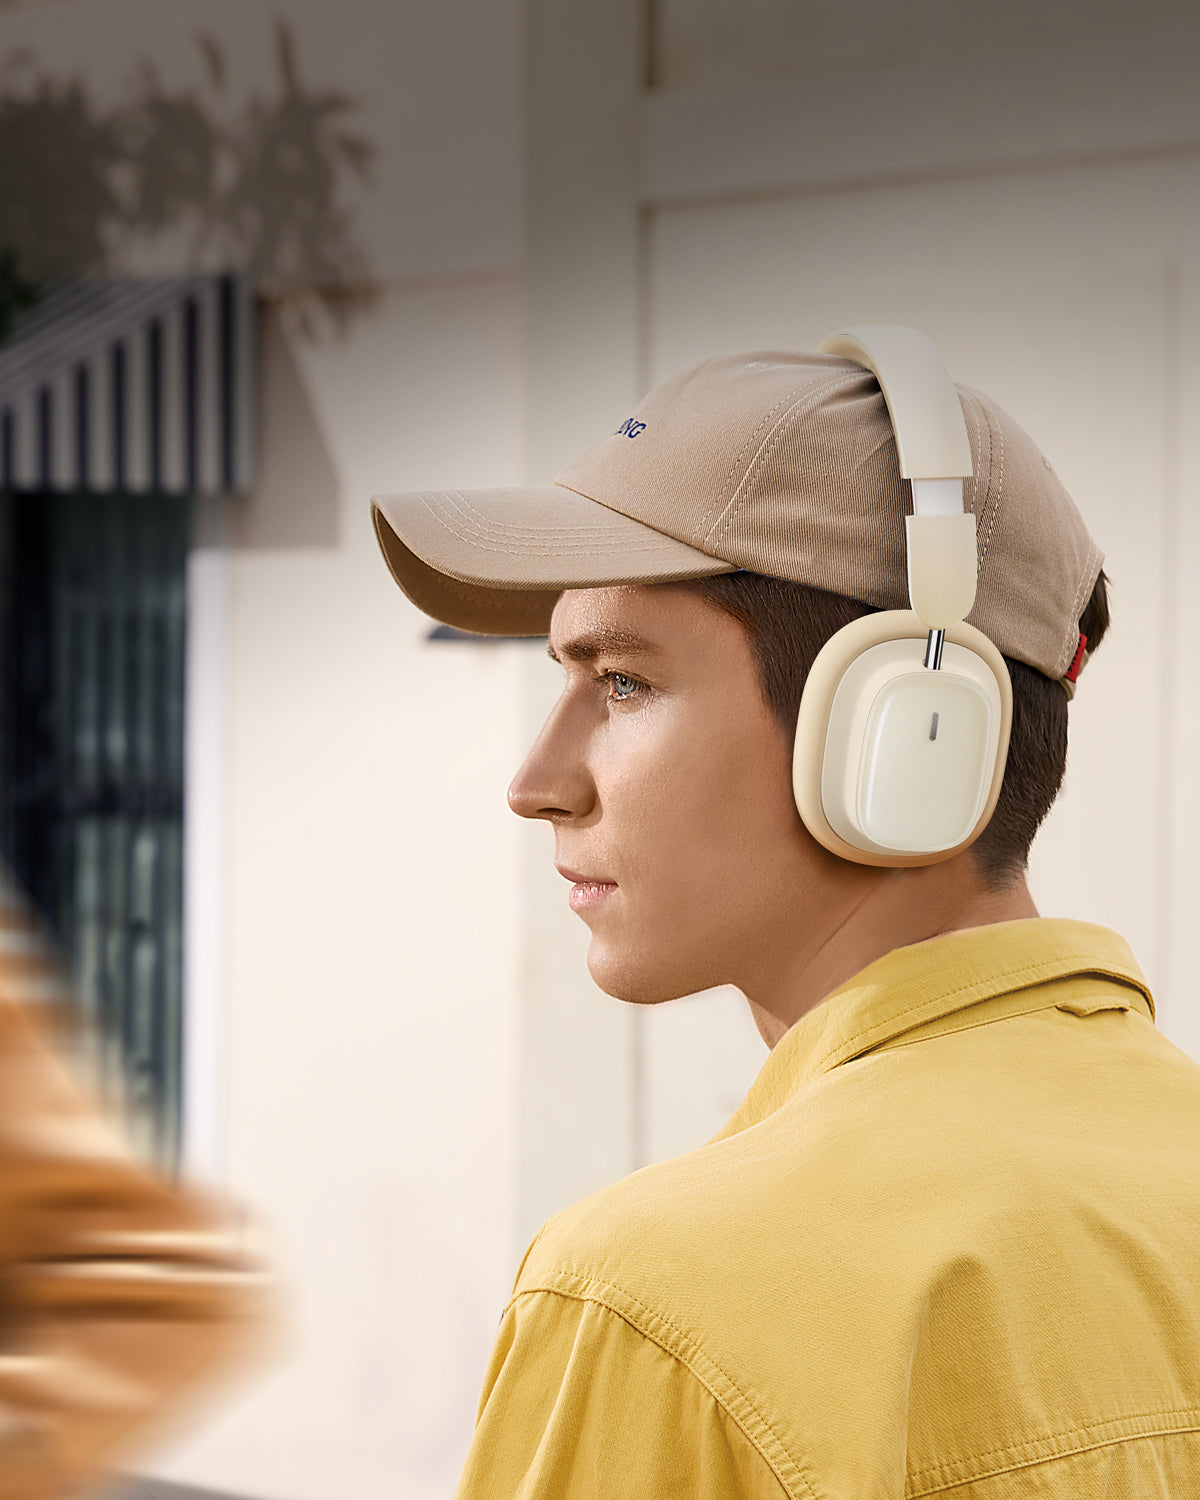 A young man wears Baseus Headphone and listens music 